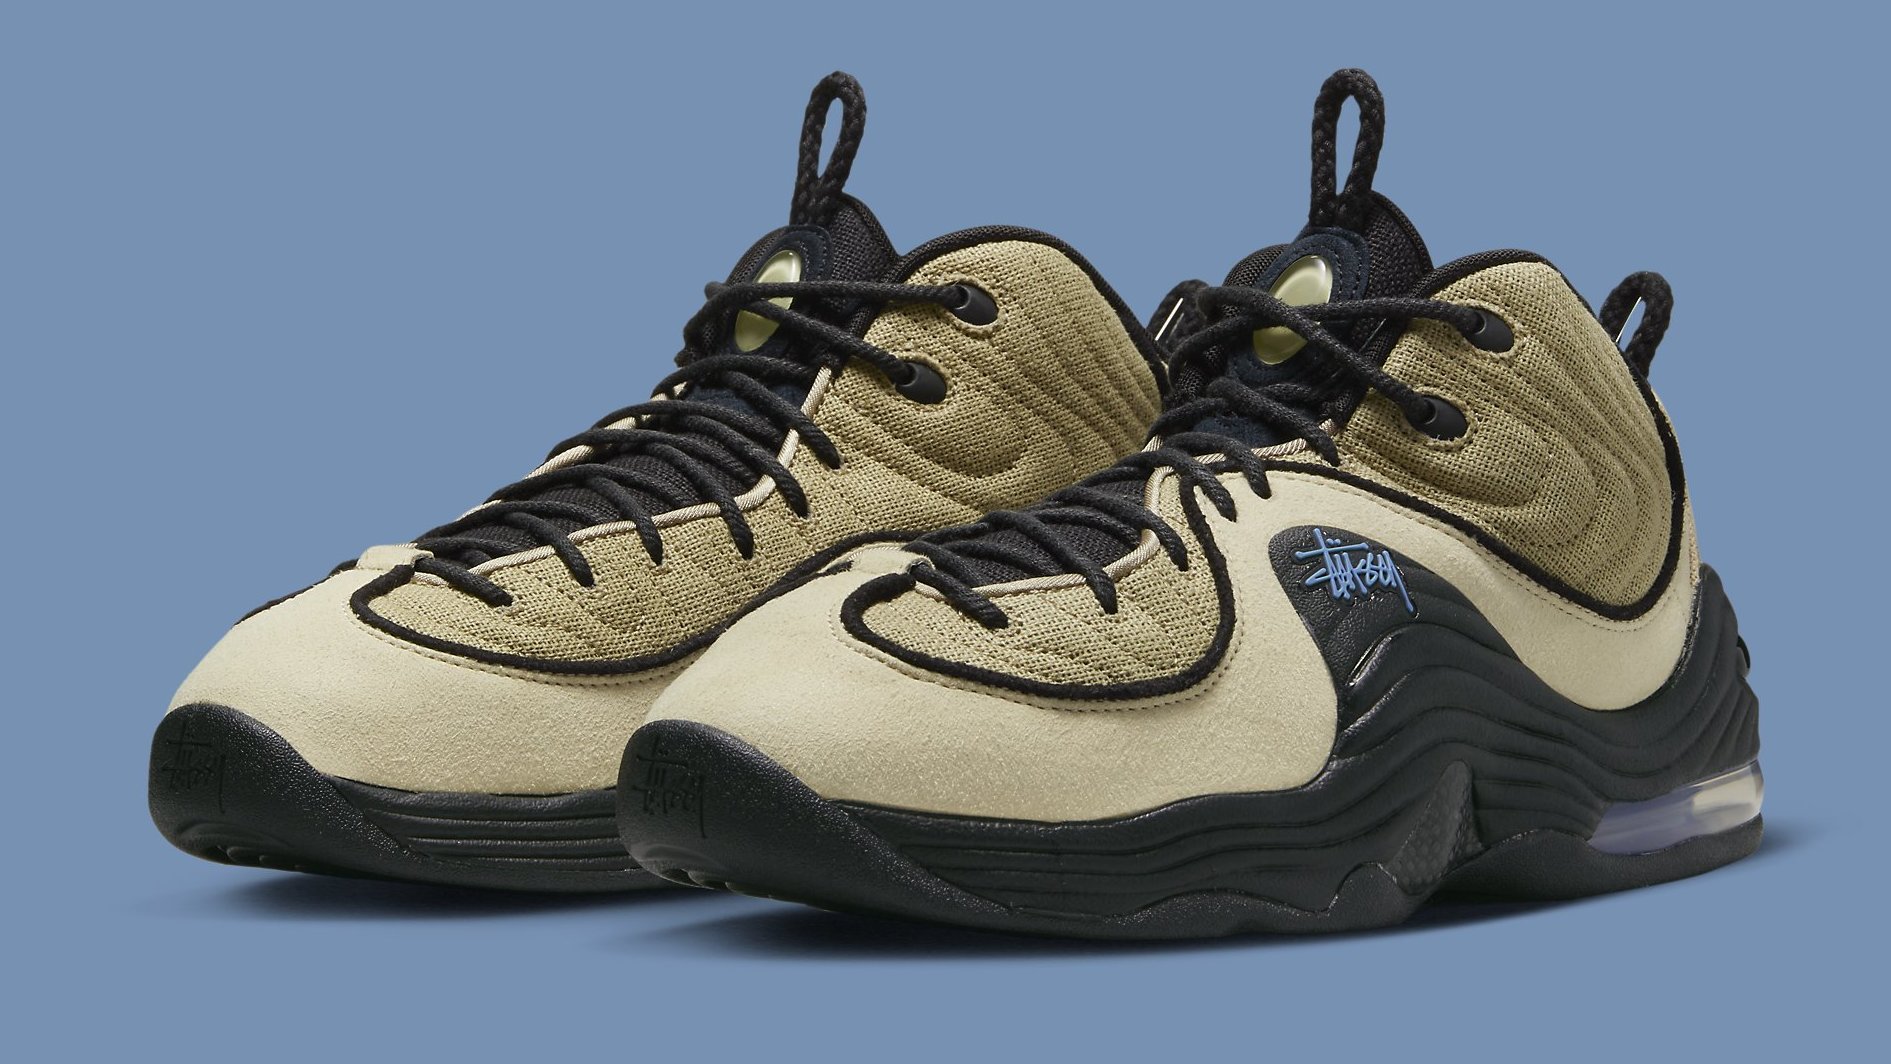 Stussy's Next Nike Air Penny 2 Collab Drops This Month